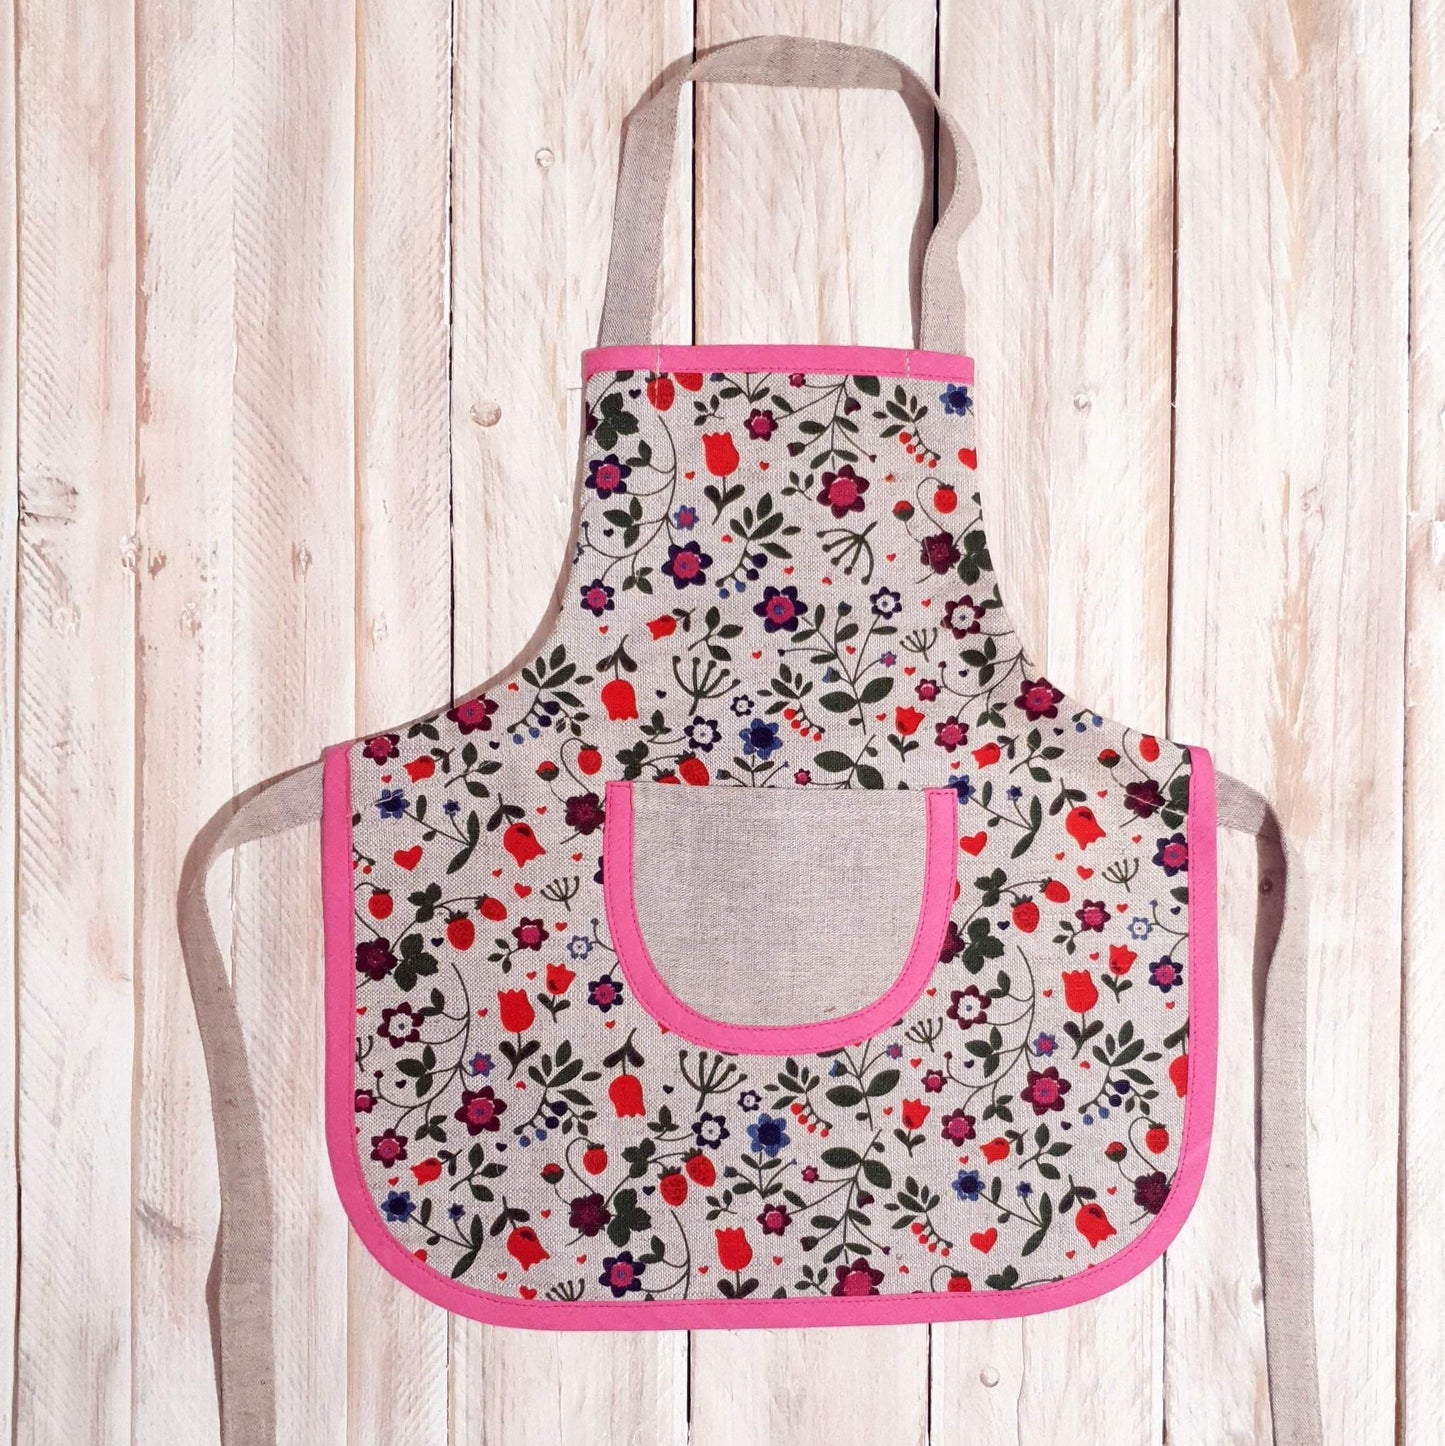 Children's apron (1-4 years old) ANNA - Linen4me